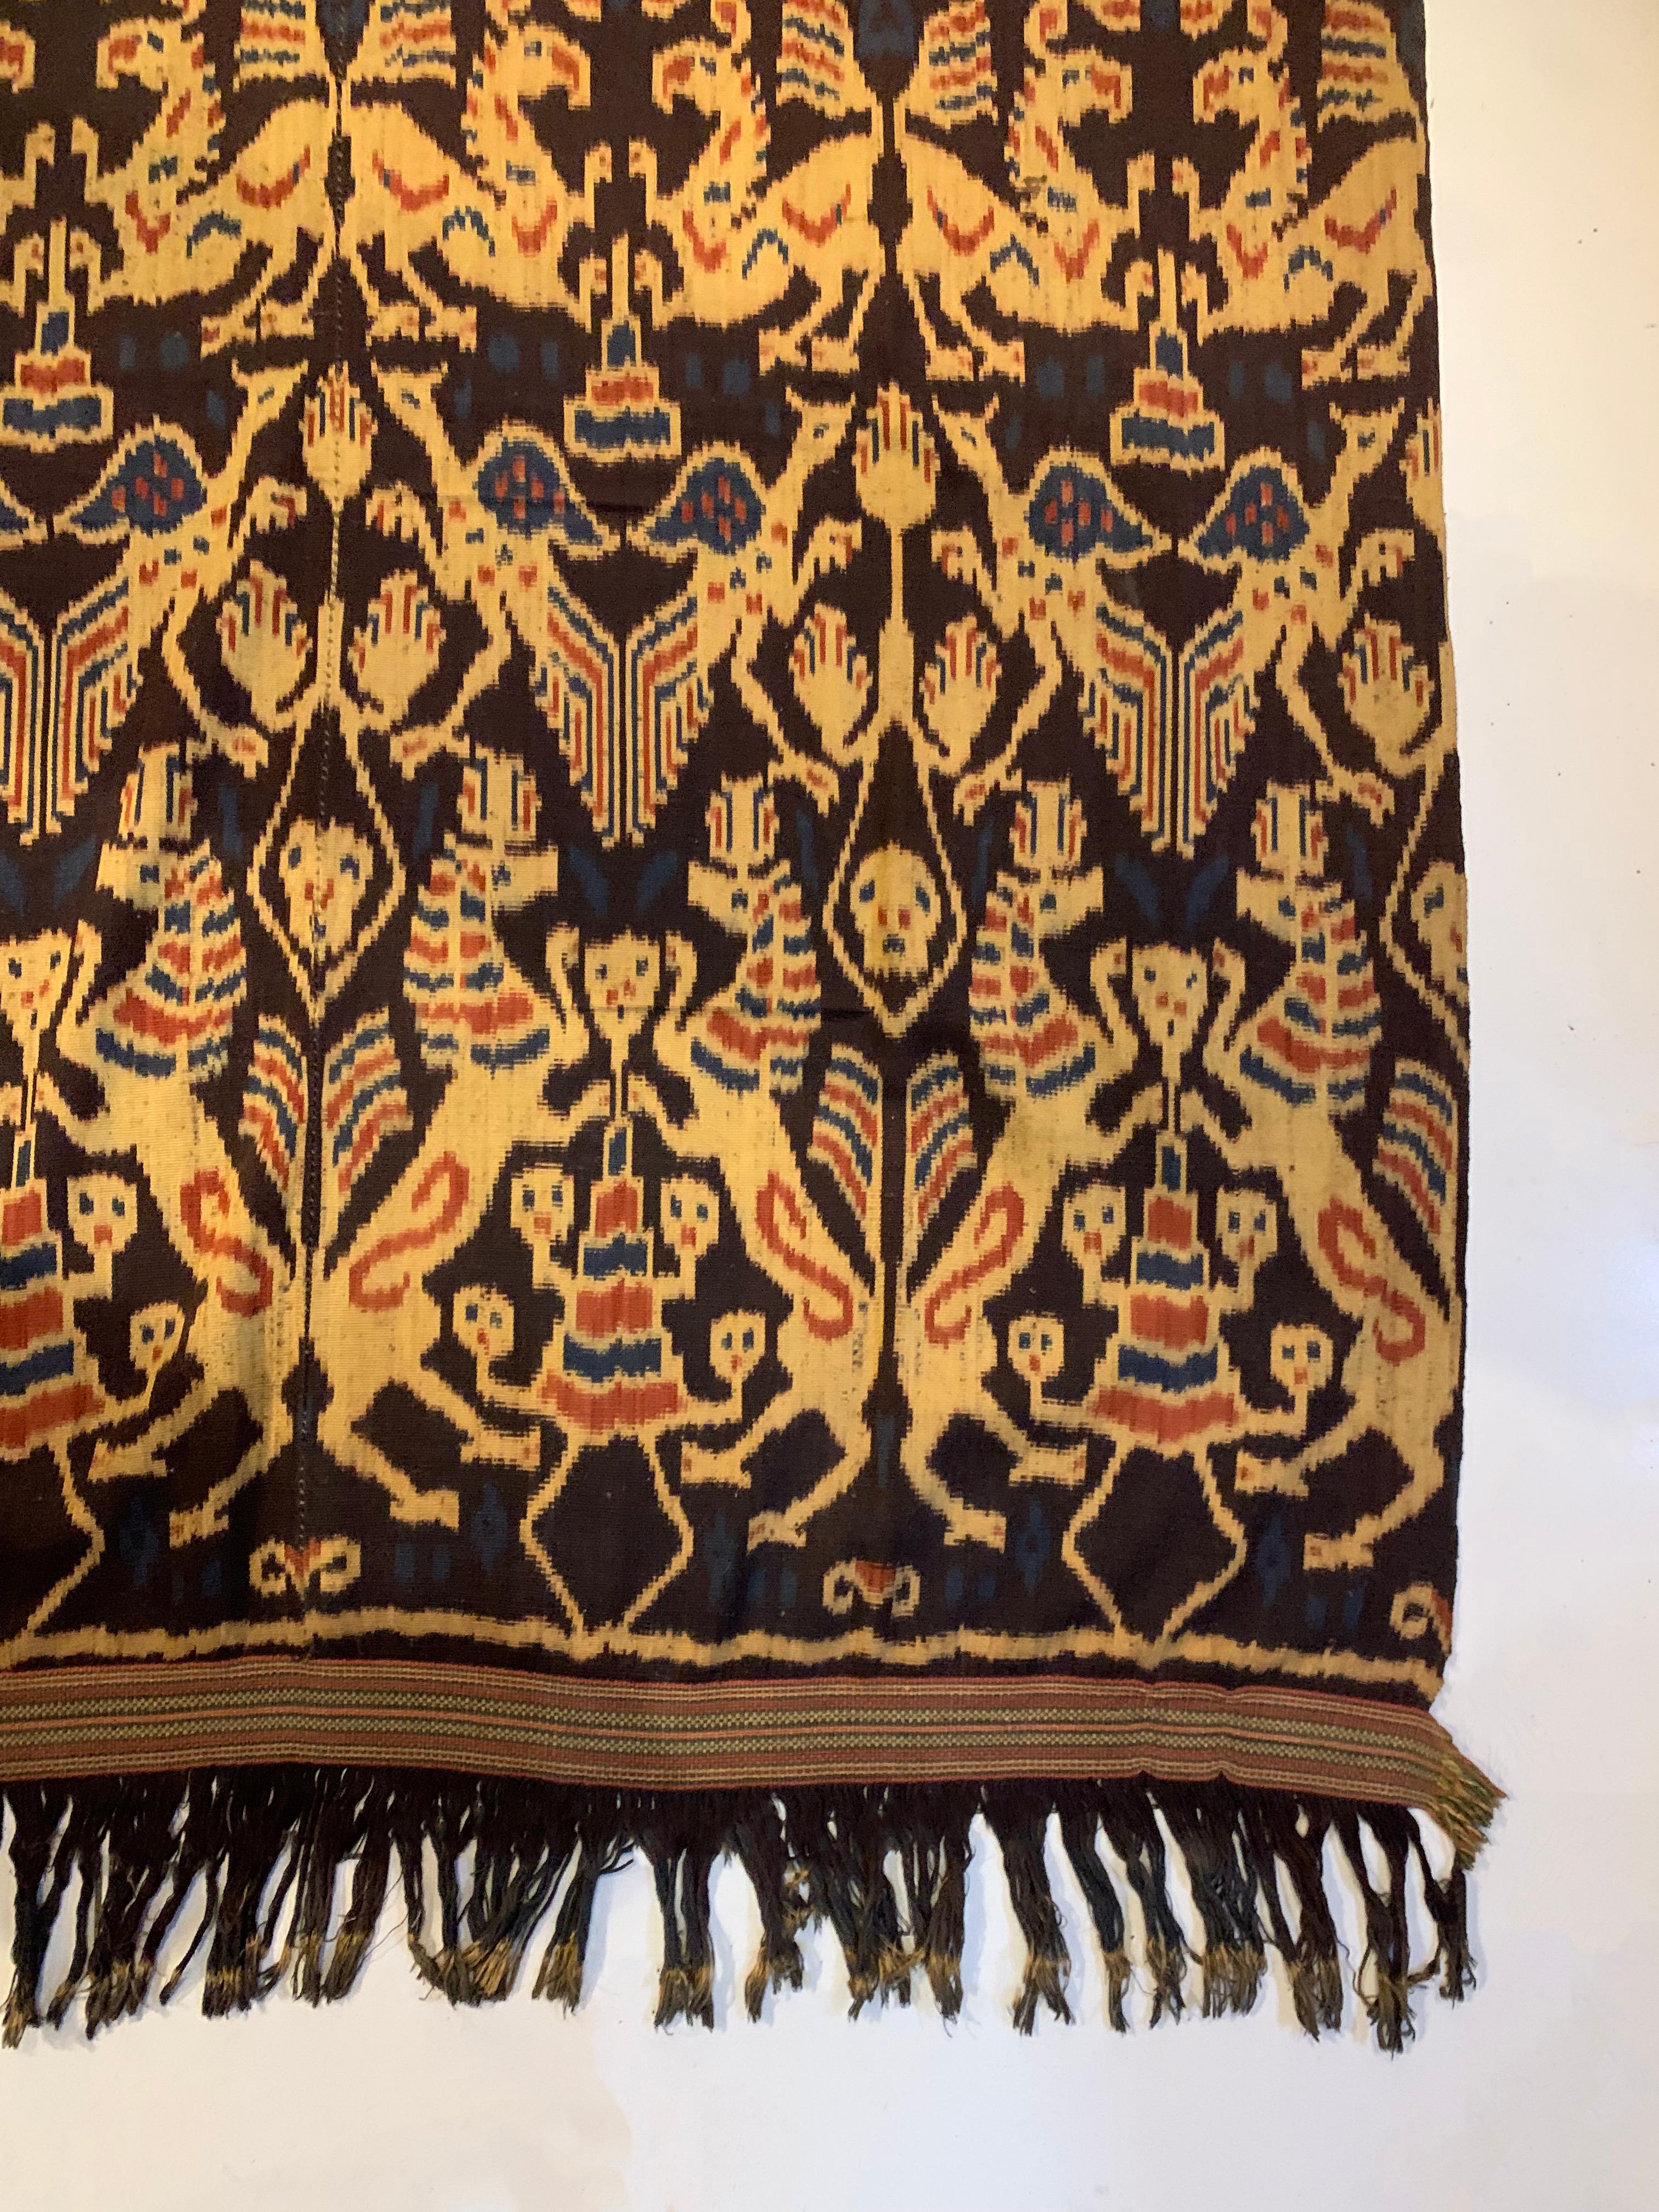 Hand-Woven Rare Ikat Textile from Sumba Island Stunning Tribal Motifs, Indonesia  For Sale